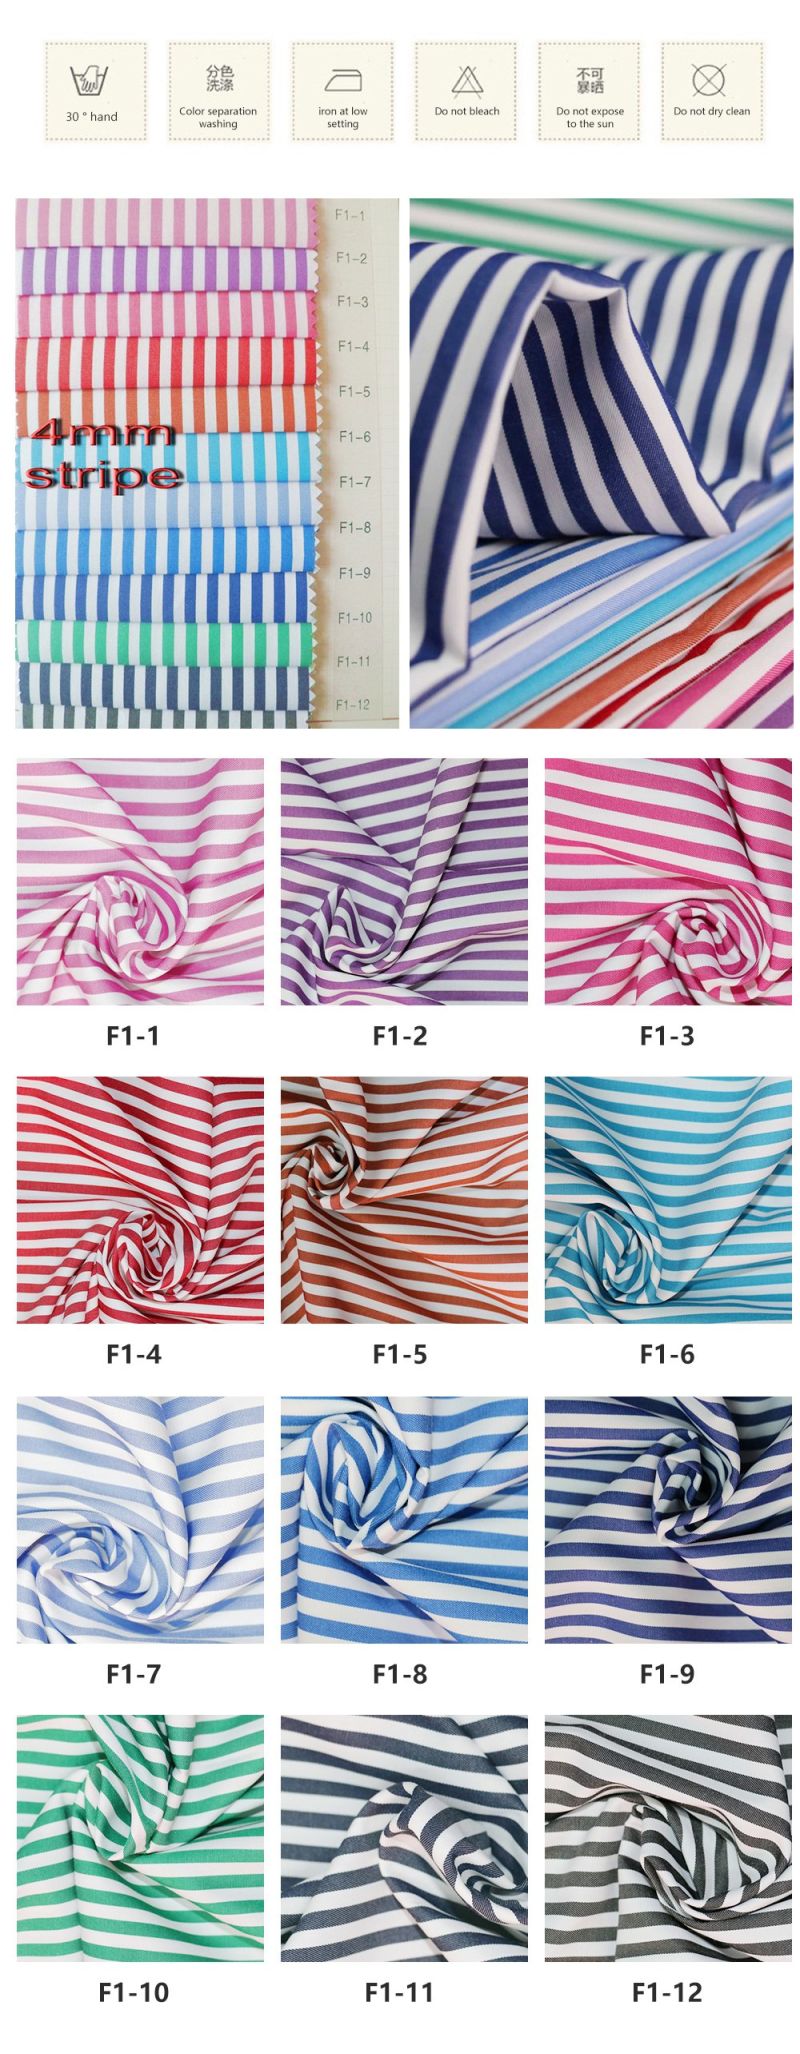 Hot Selling Make to Order Plaid Fabric Polyester Cotton Yarn Dyed Fabric for Men's T-Shirt